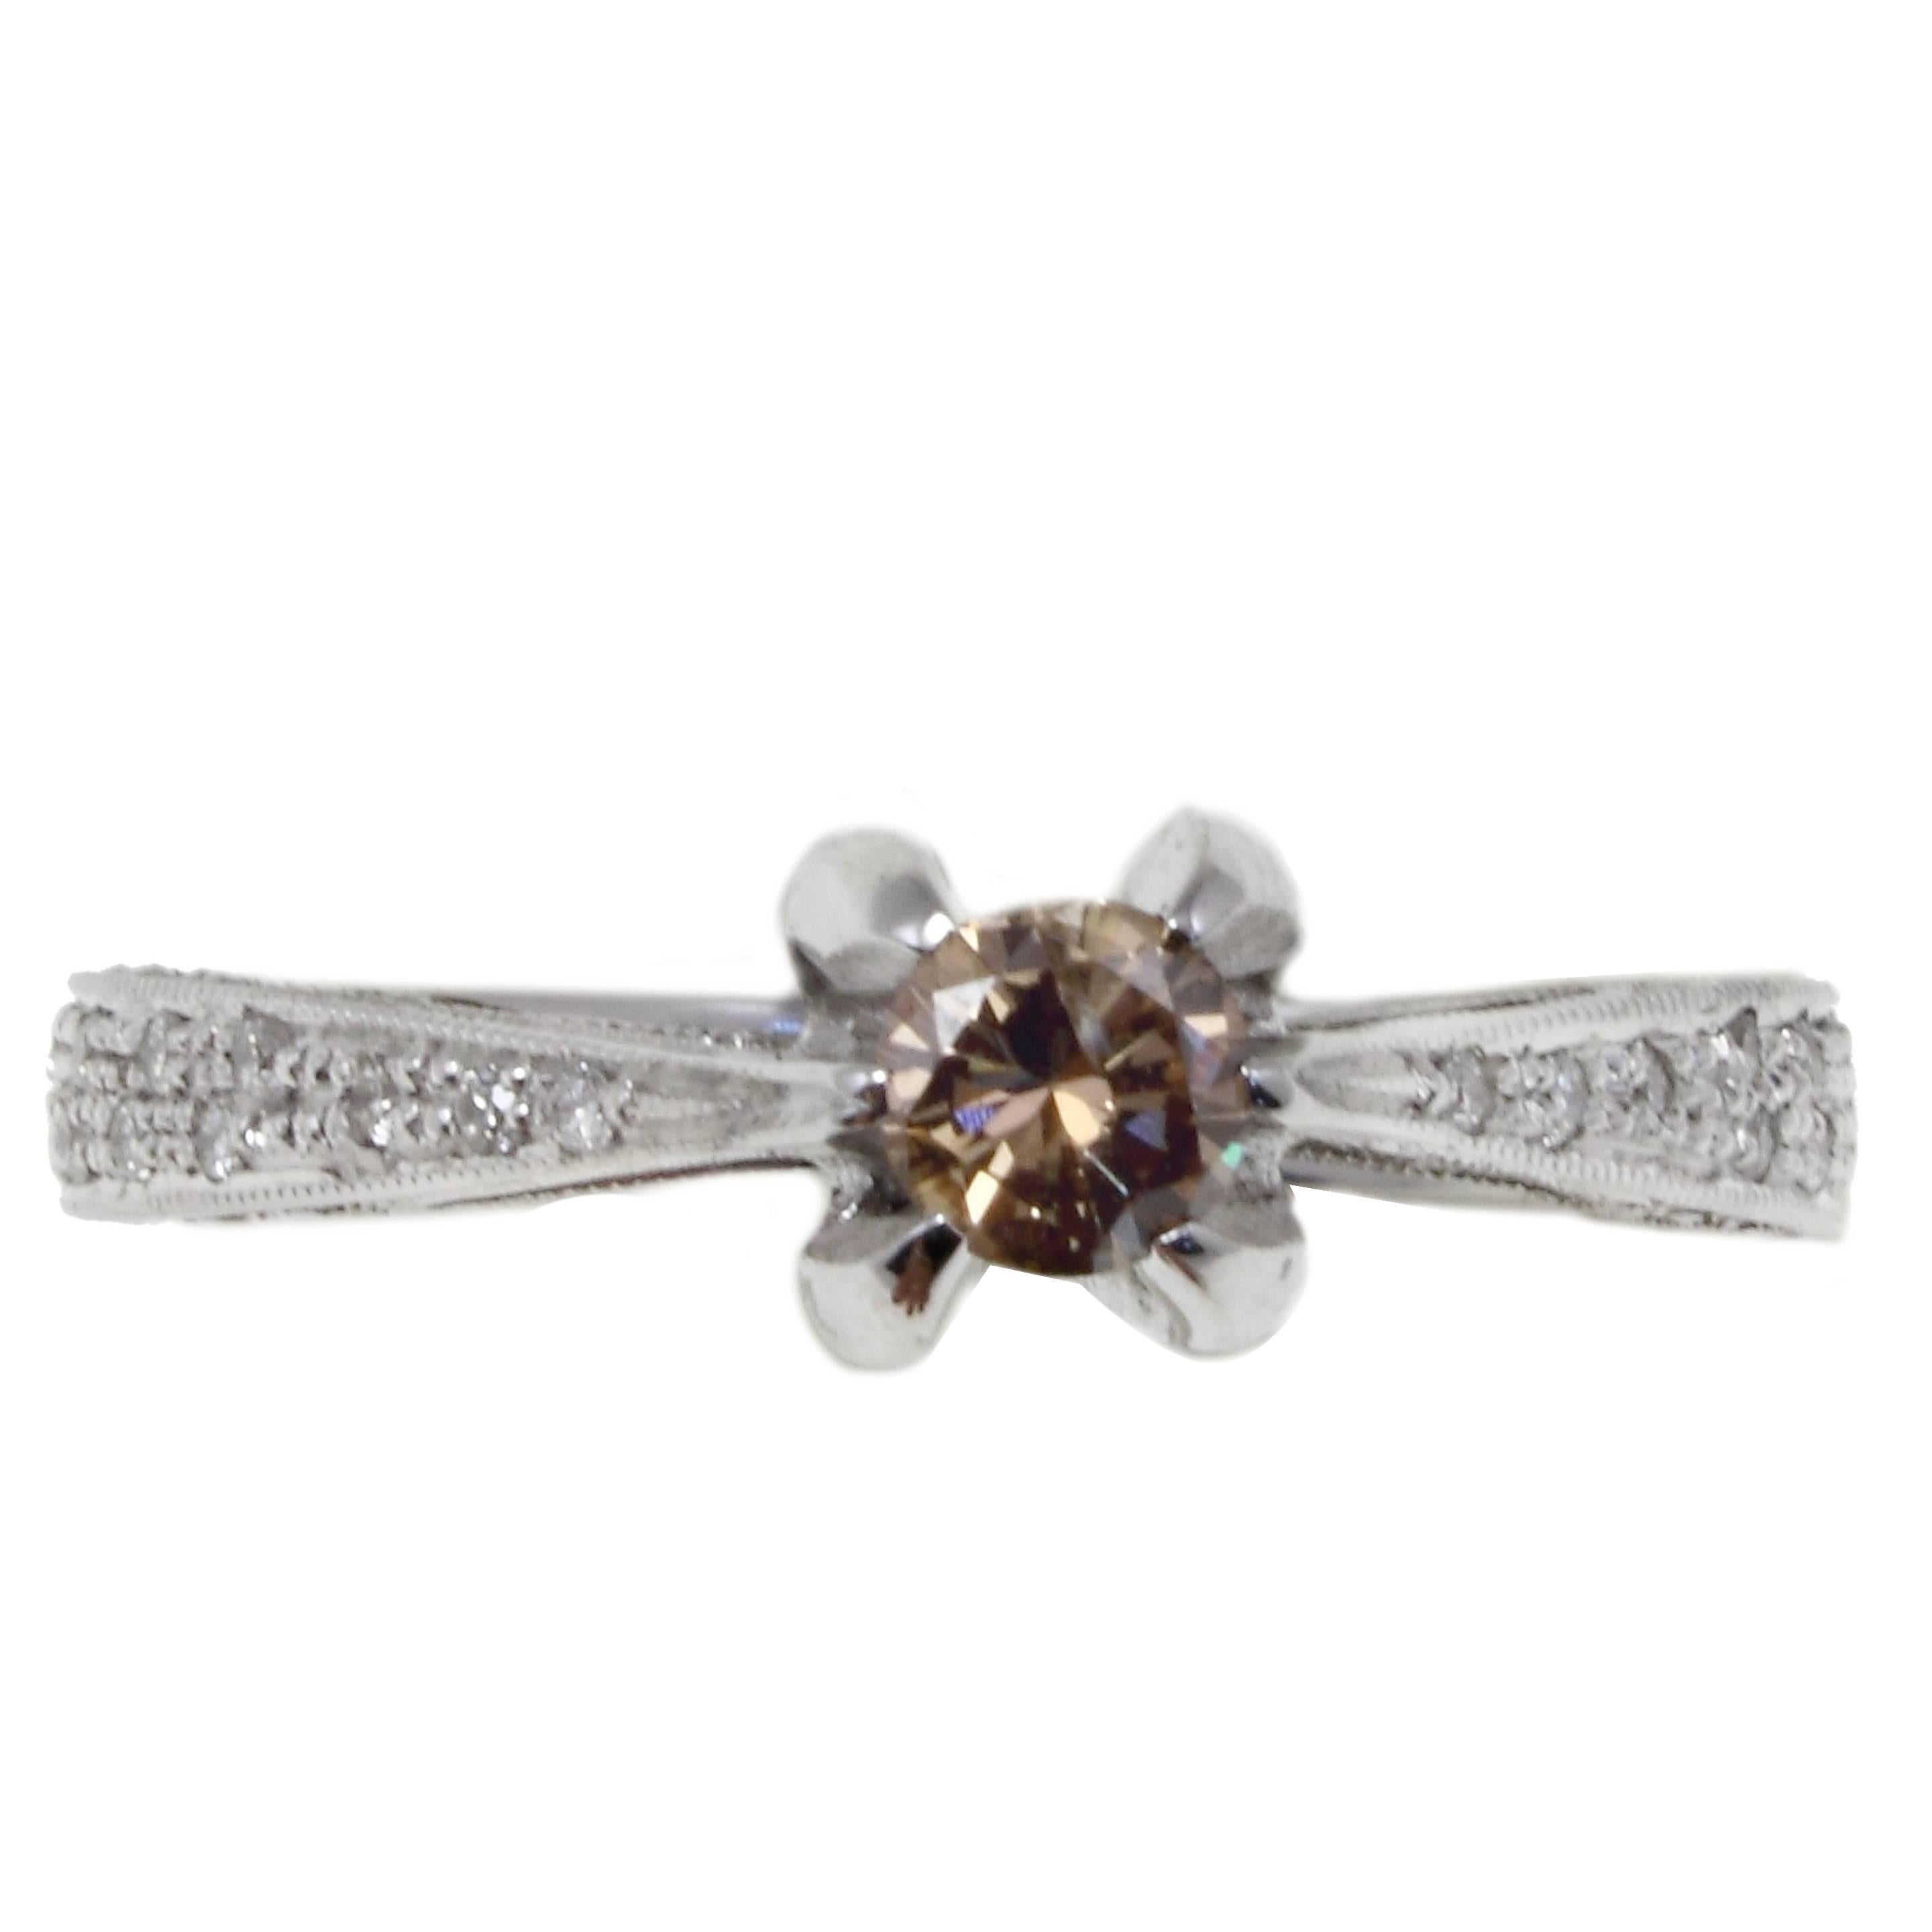 0.25 ct White Diamonds, 0.23 ct Brown Fancy Diamond, 18 kt White Gold Ring For Sale